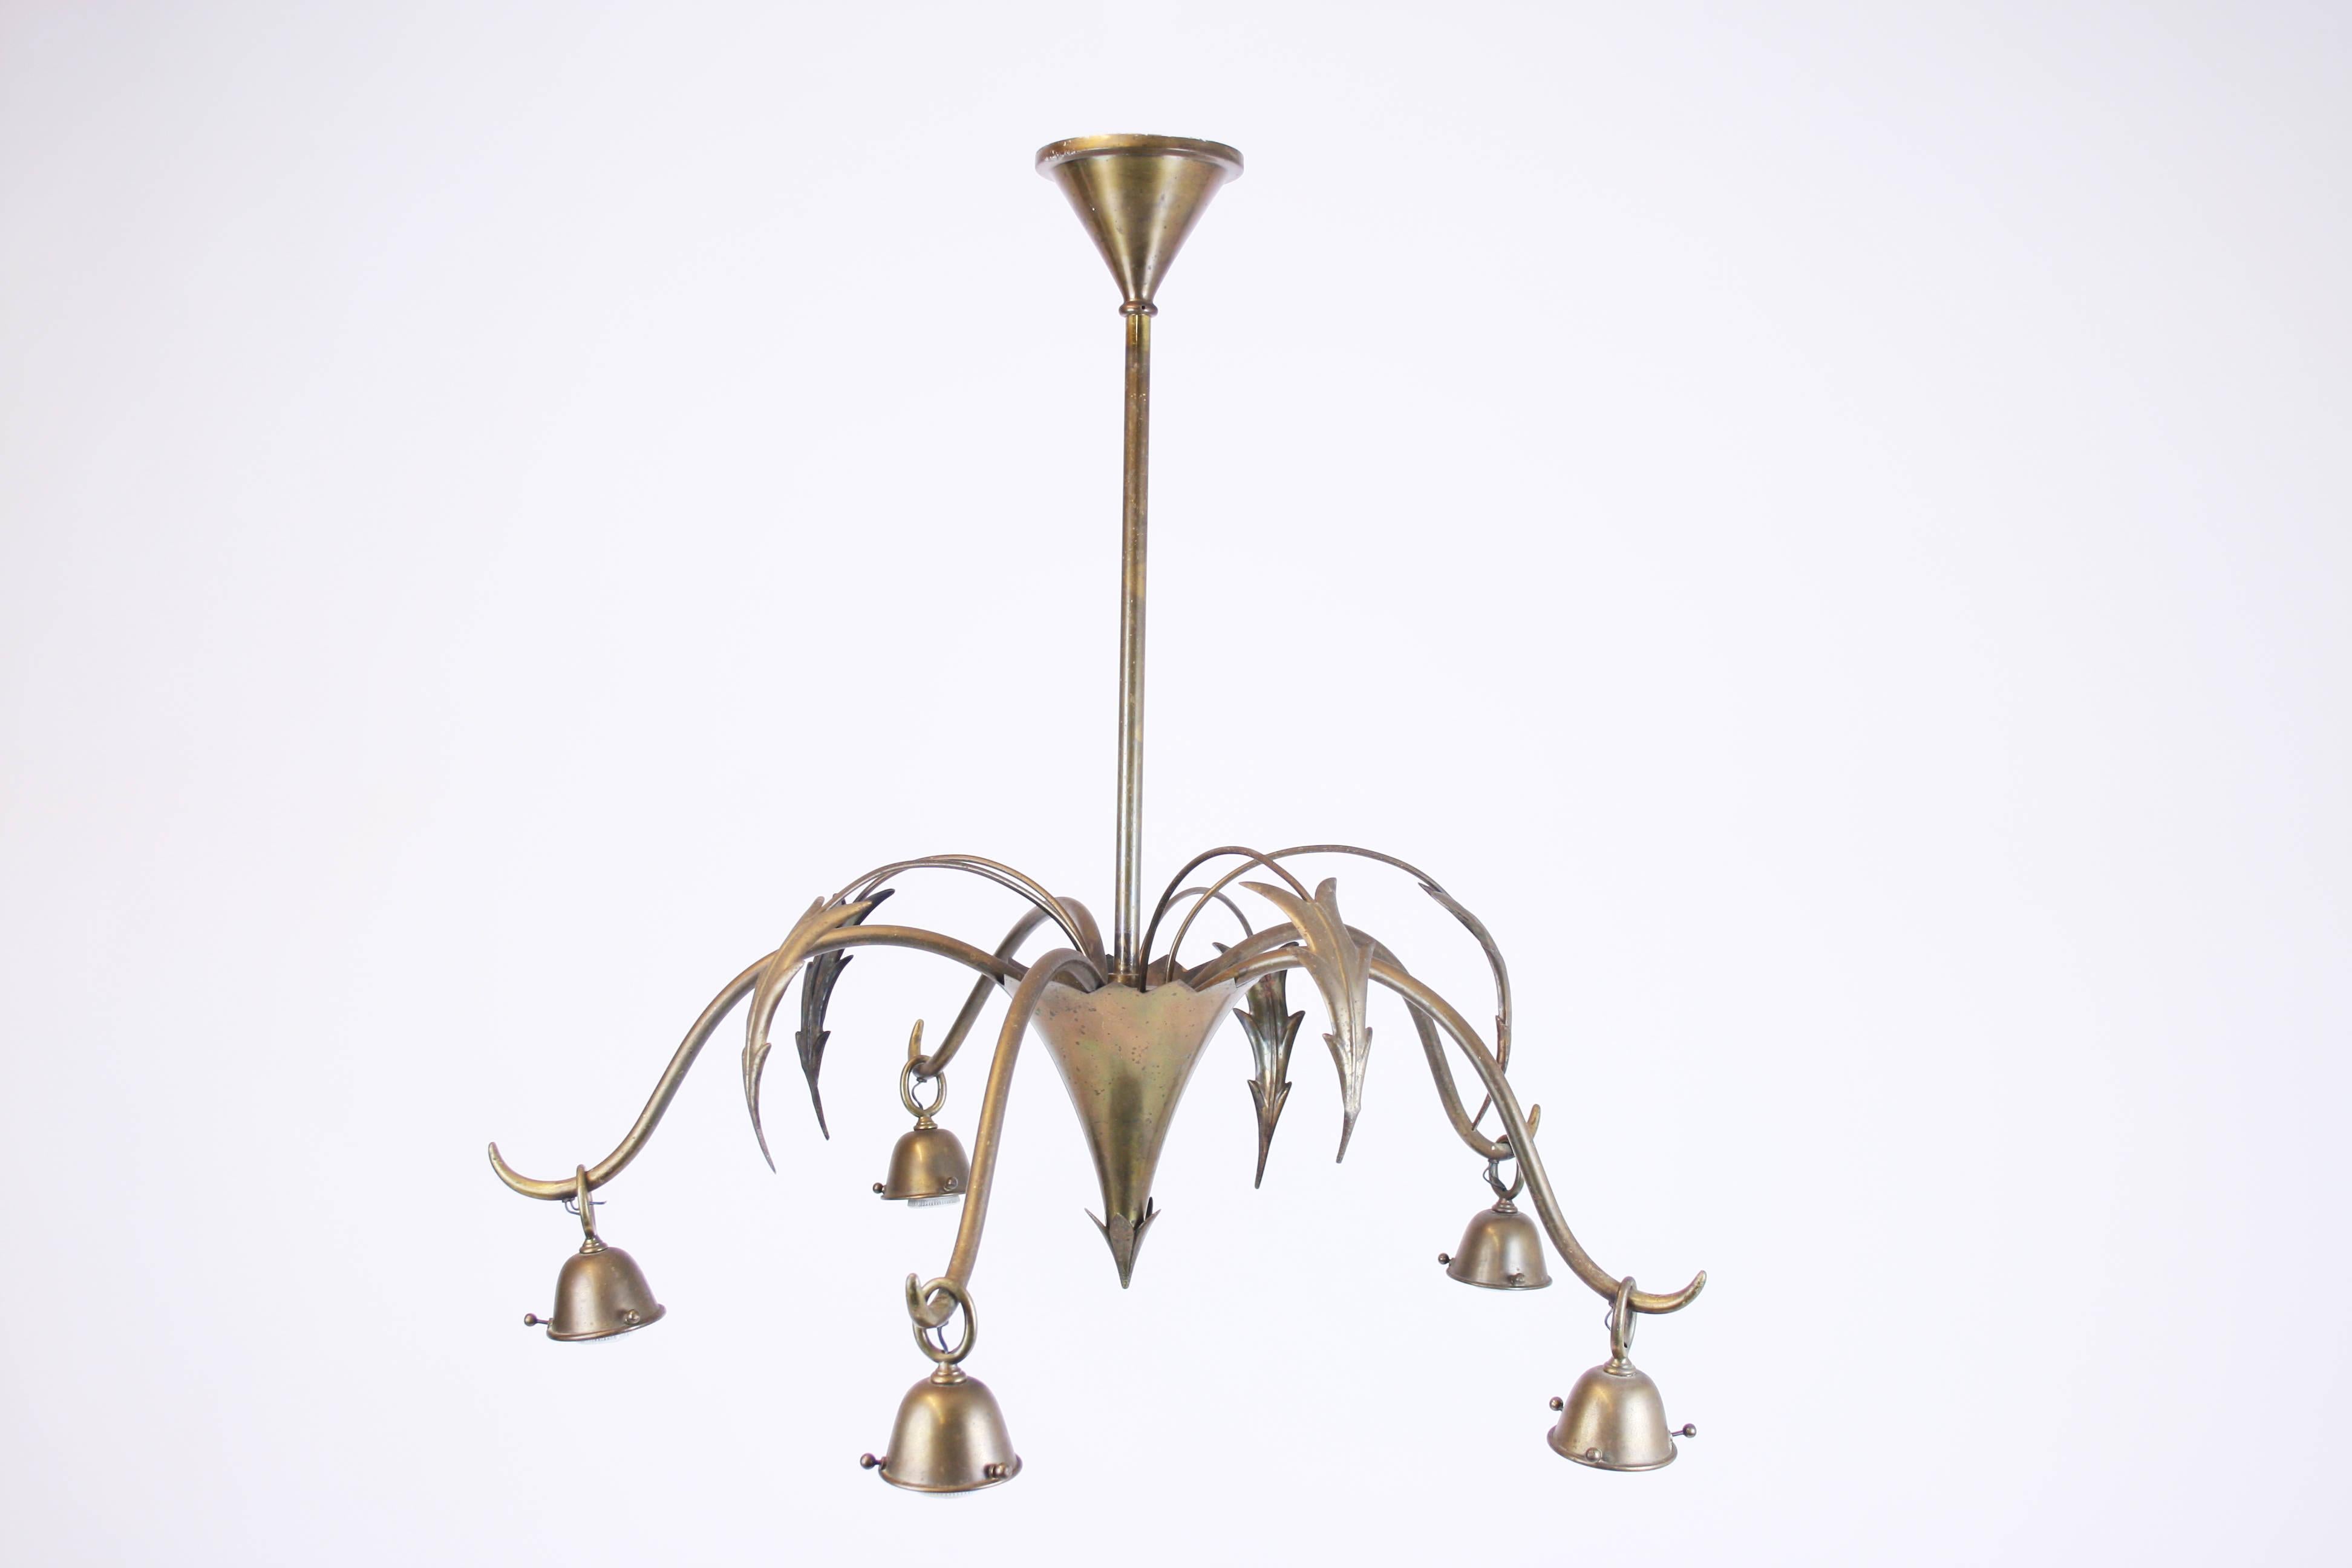 Chandelier of solid brass in the manner of Dagobert Peche and Wiener Werkstätte, Austria around 1910. It impressively shows how various new signs and languages of form were sought and tried out during this period. This avant-garde object has 5 bulbs